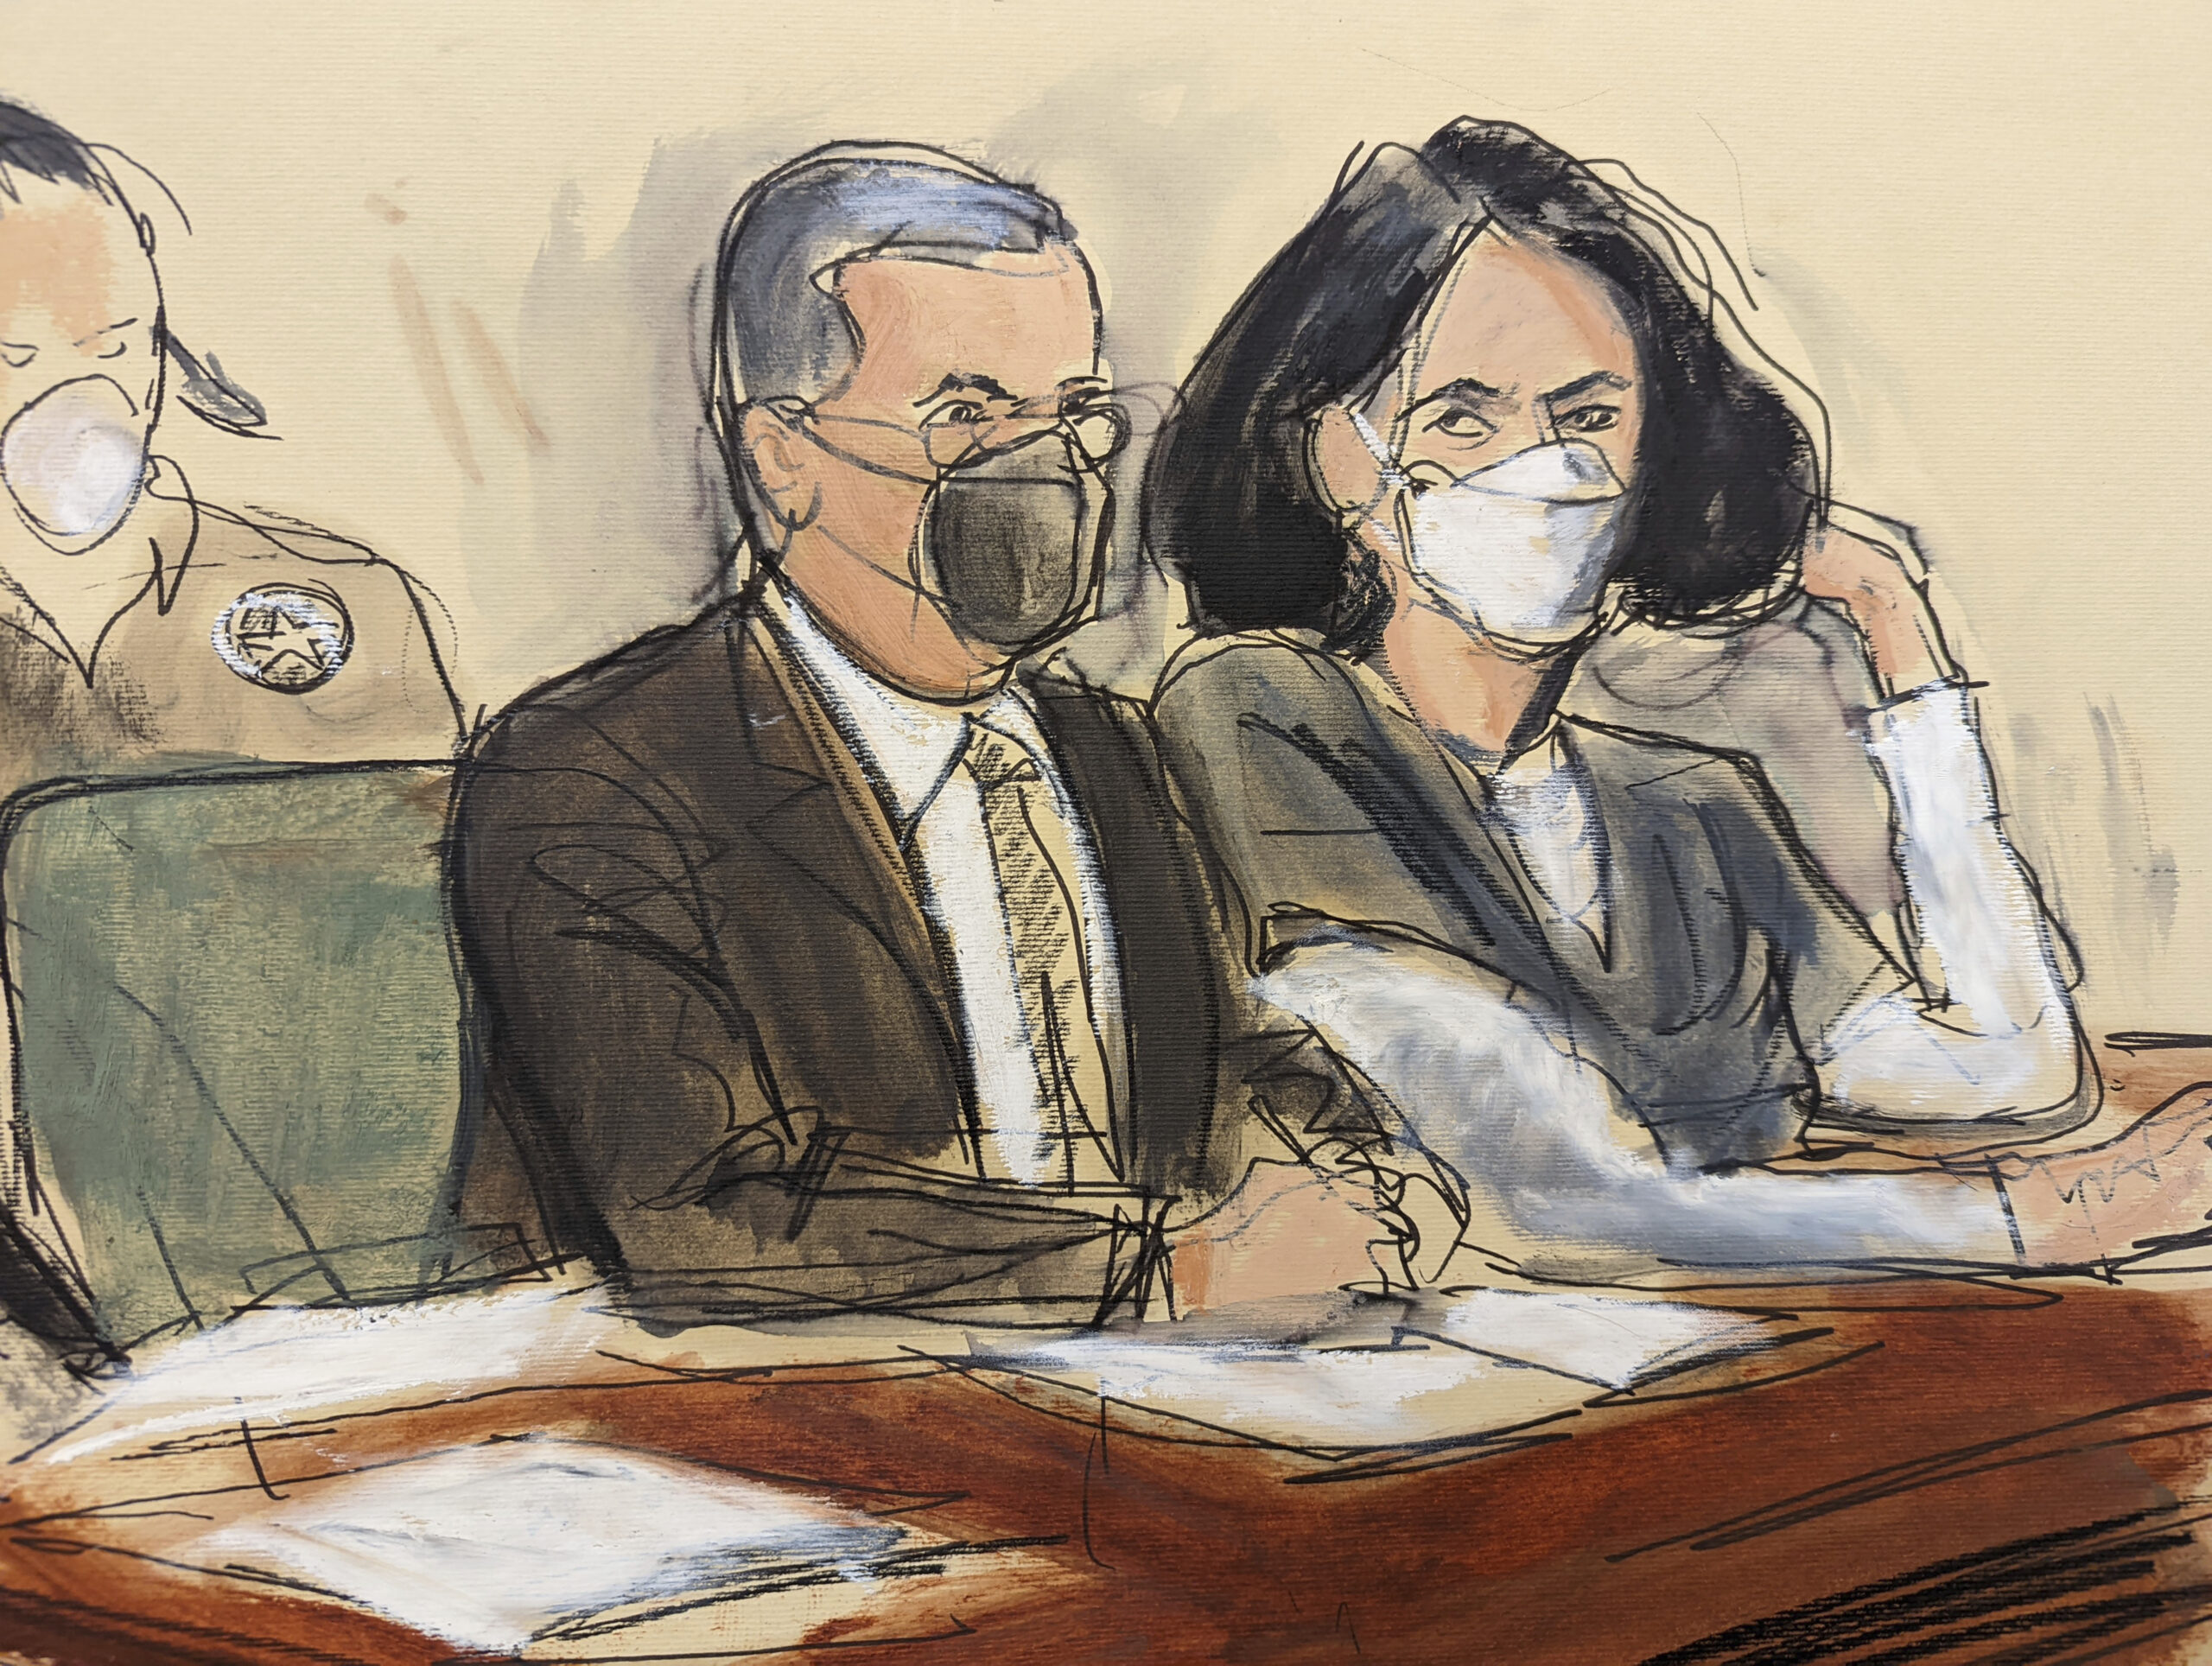 In this courtroom sketch, Ghislaine Maxwell, right, is seated beside her attorney, Christian Everdell, as they watch the prosecutor speak during her sentencing, Tuesday, June 28, 2022, in New York. Maxwell faces the likelihood of years in prison when she is sentenced for helping the wealthy financier Jeffrey Epstein sexually abuse underage girls. (AP Photo/Elizabeth Williams)